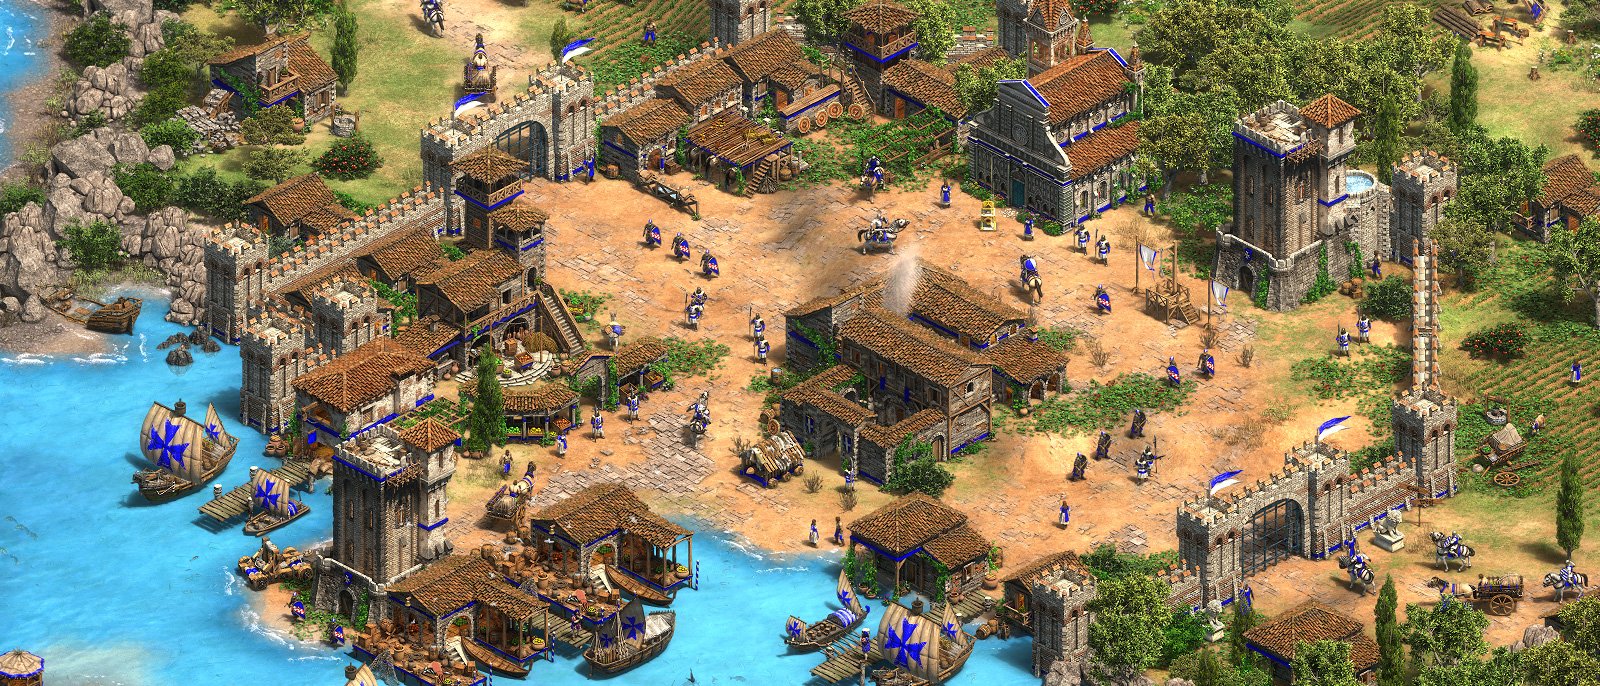 Getting Started with Age of Empires II: DE - Xbox - Age of Empires